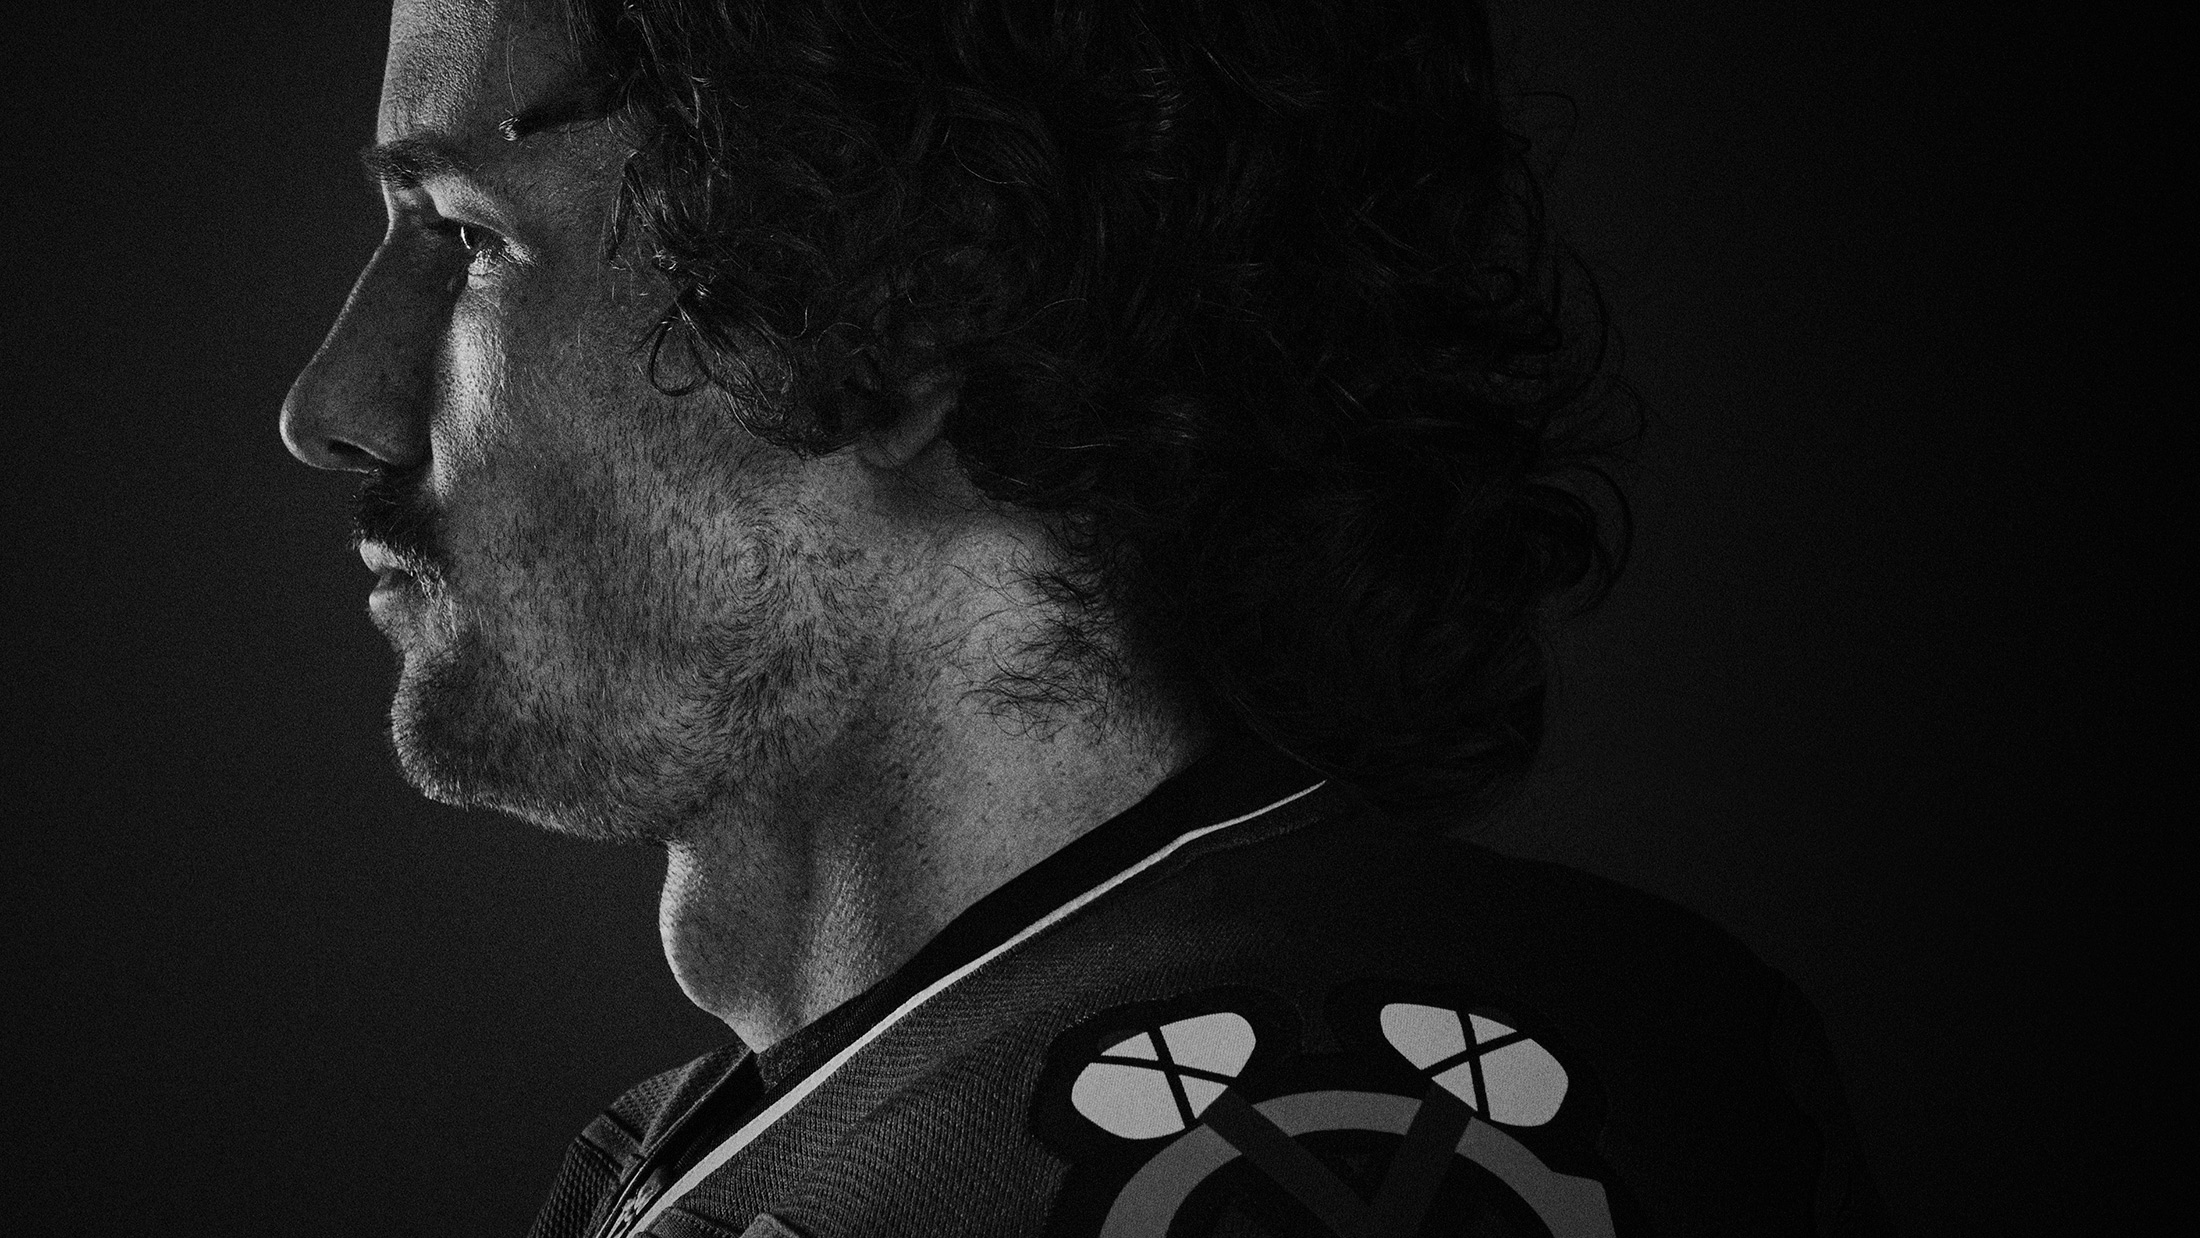 Duncan Keith | Hockey | Aaron Cobb Commercial Photography